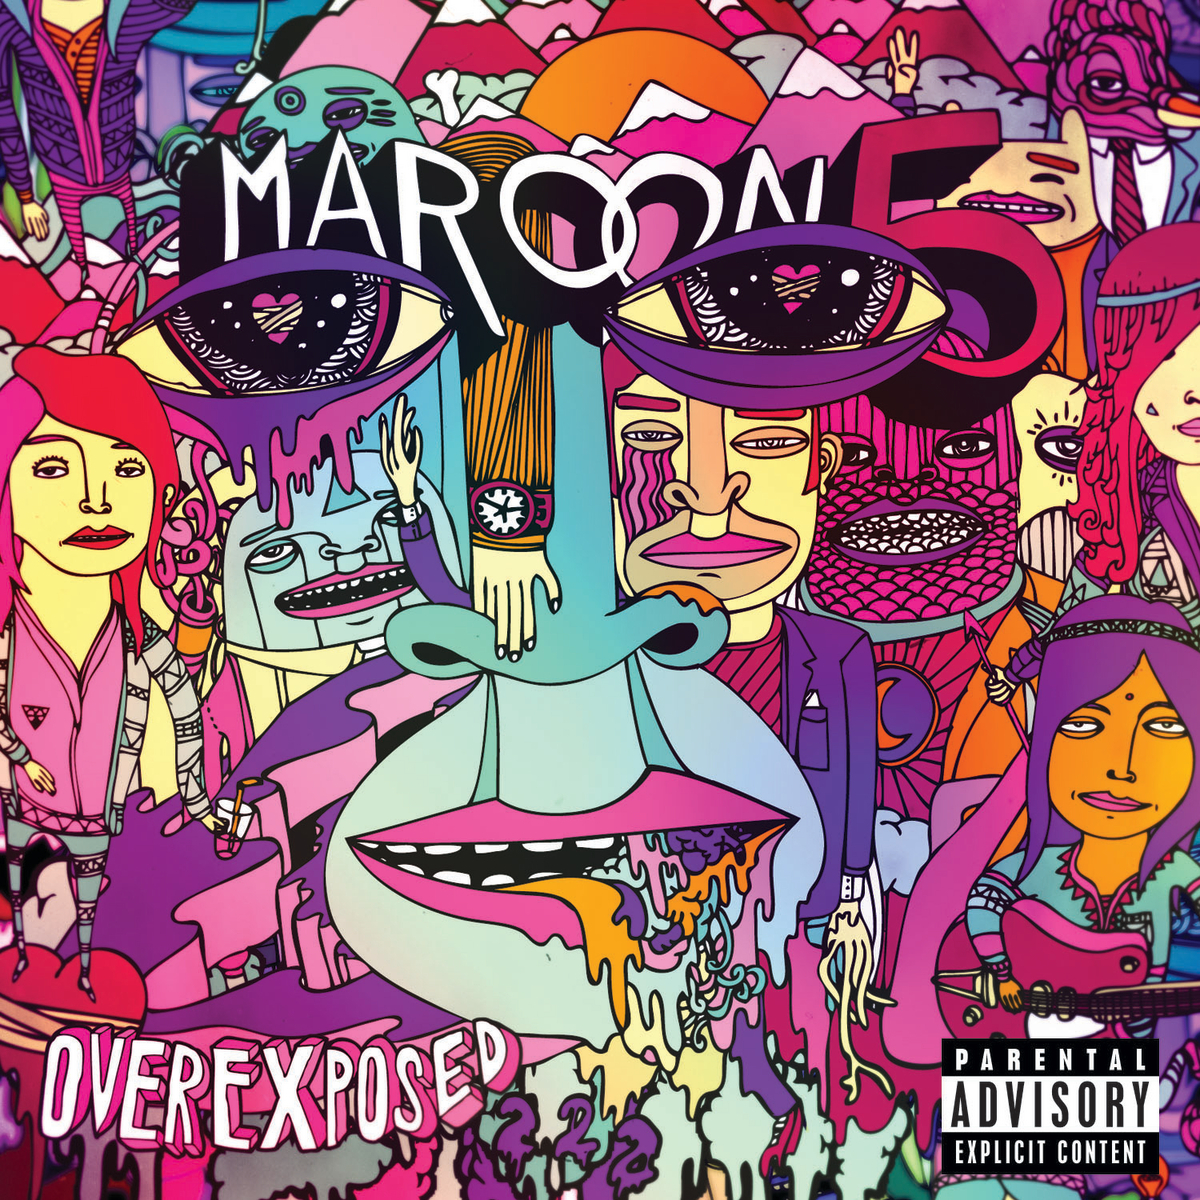 Release “Overexposed” by Maroon 5 - Cover Art - MusicBrainz